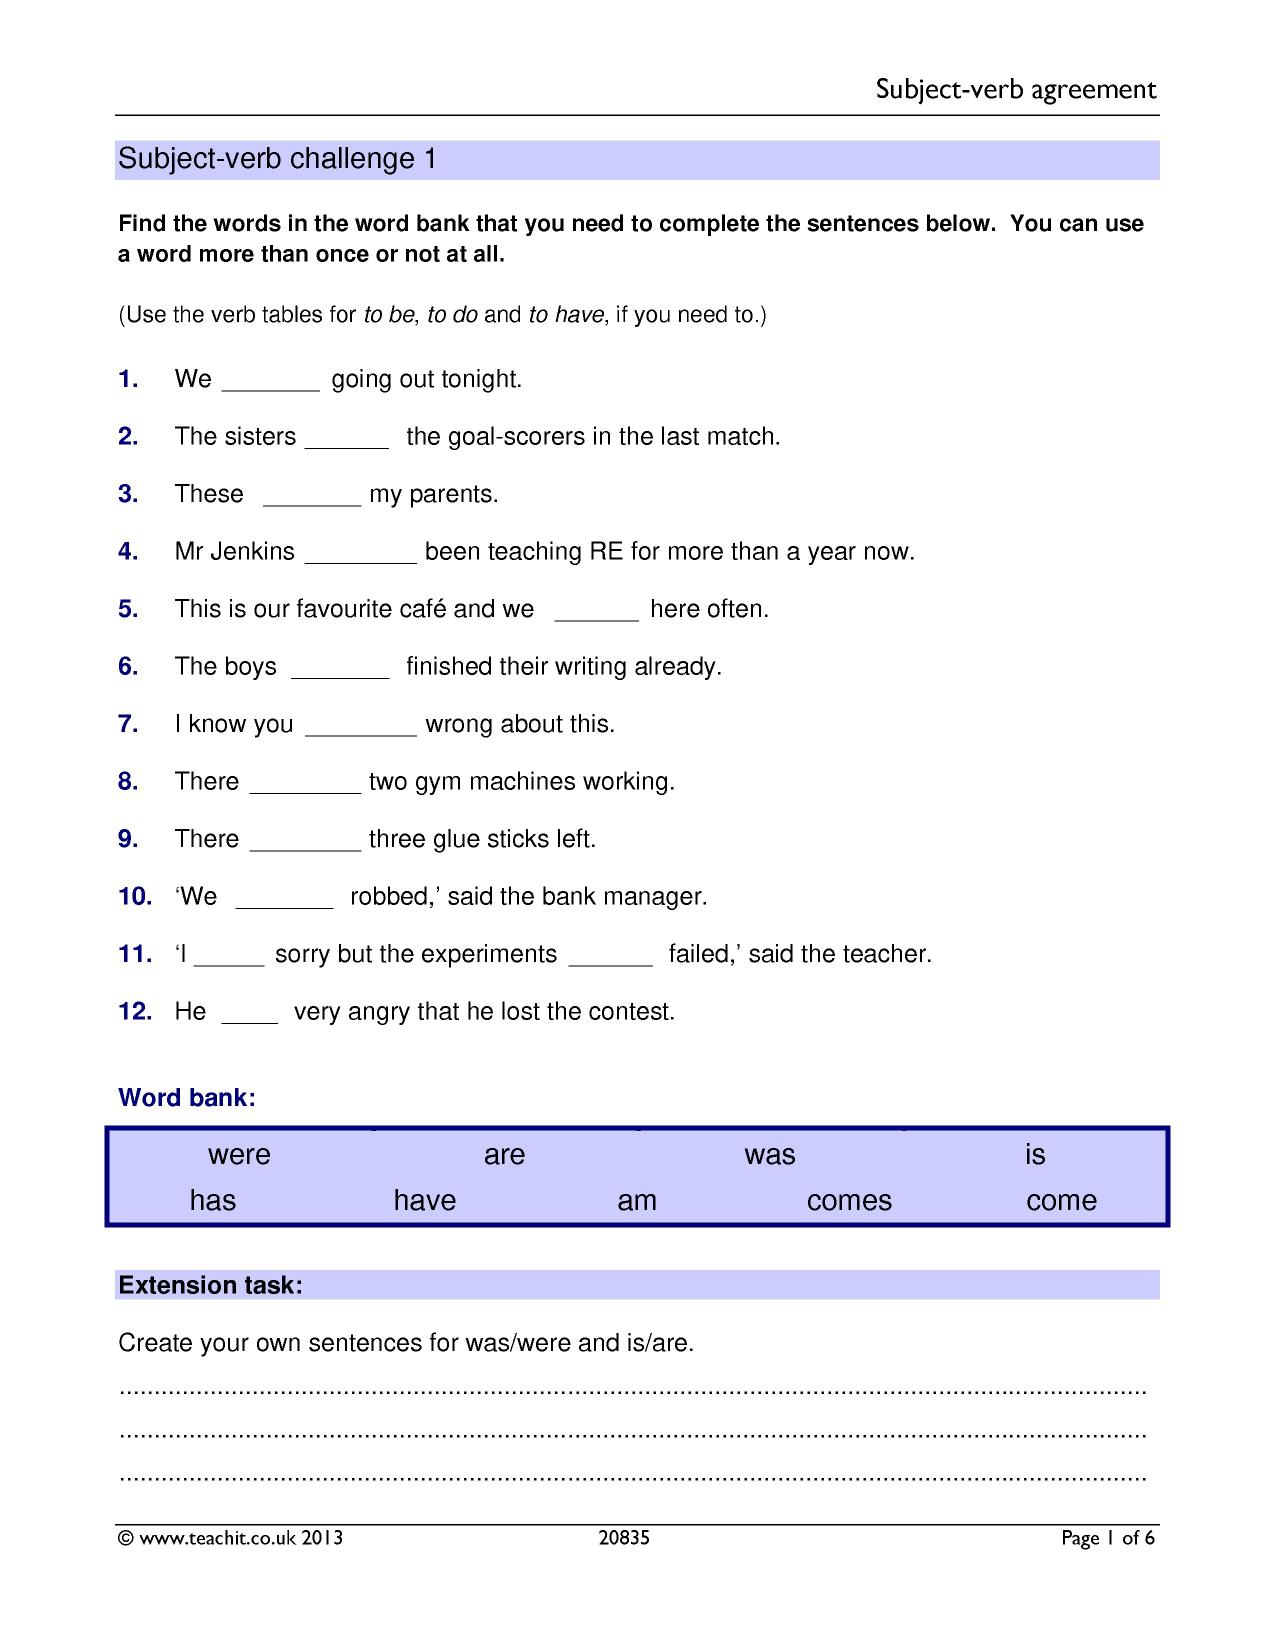 Subject verb Agreement Sentence Construction Home Page